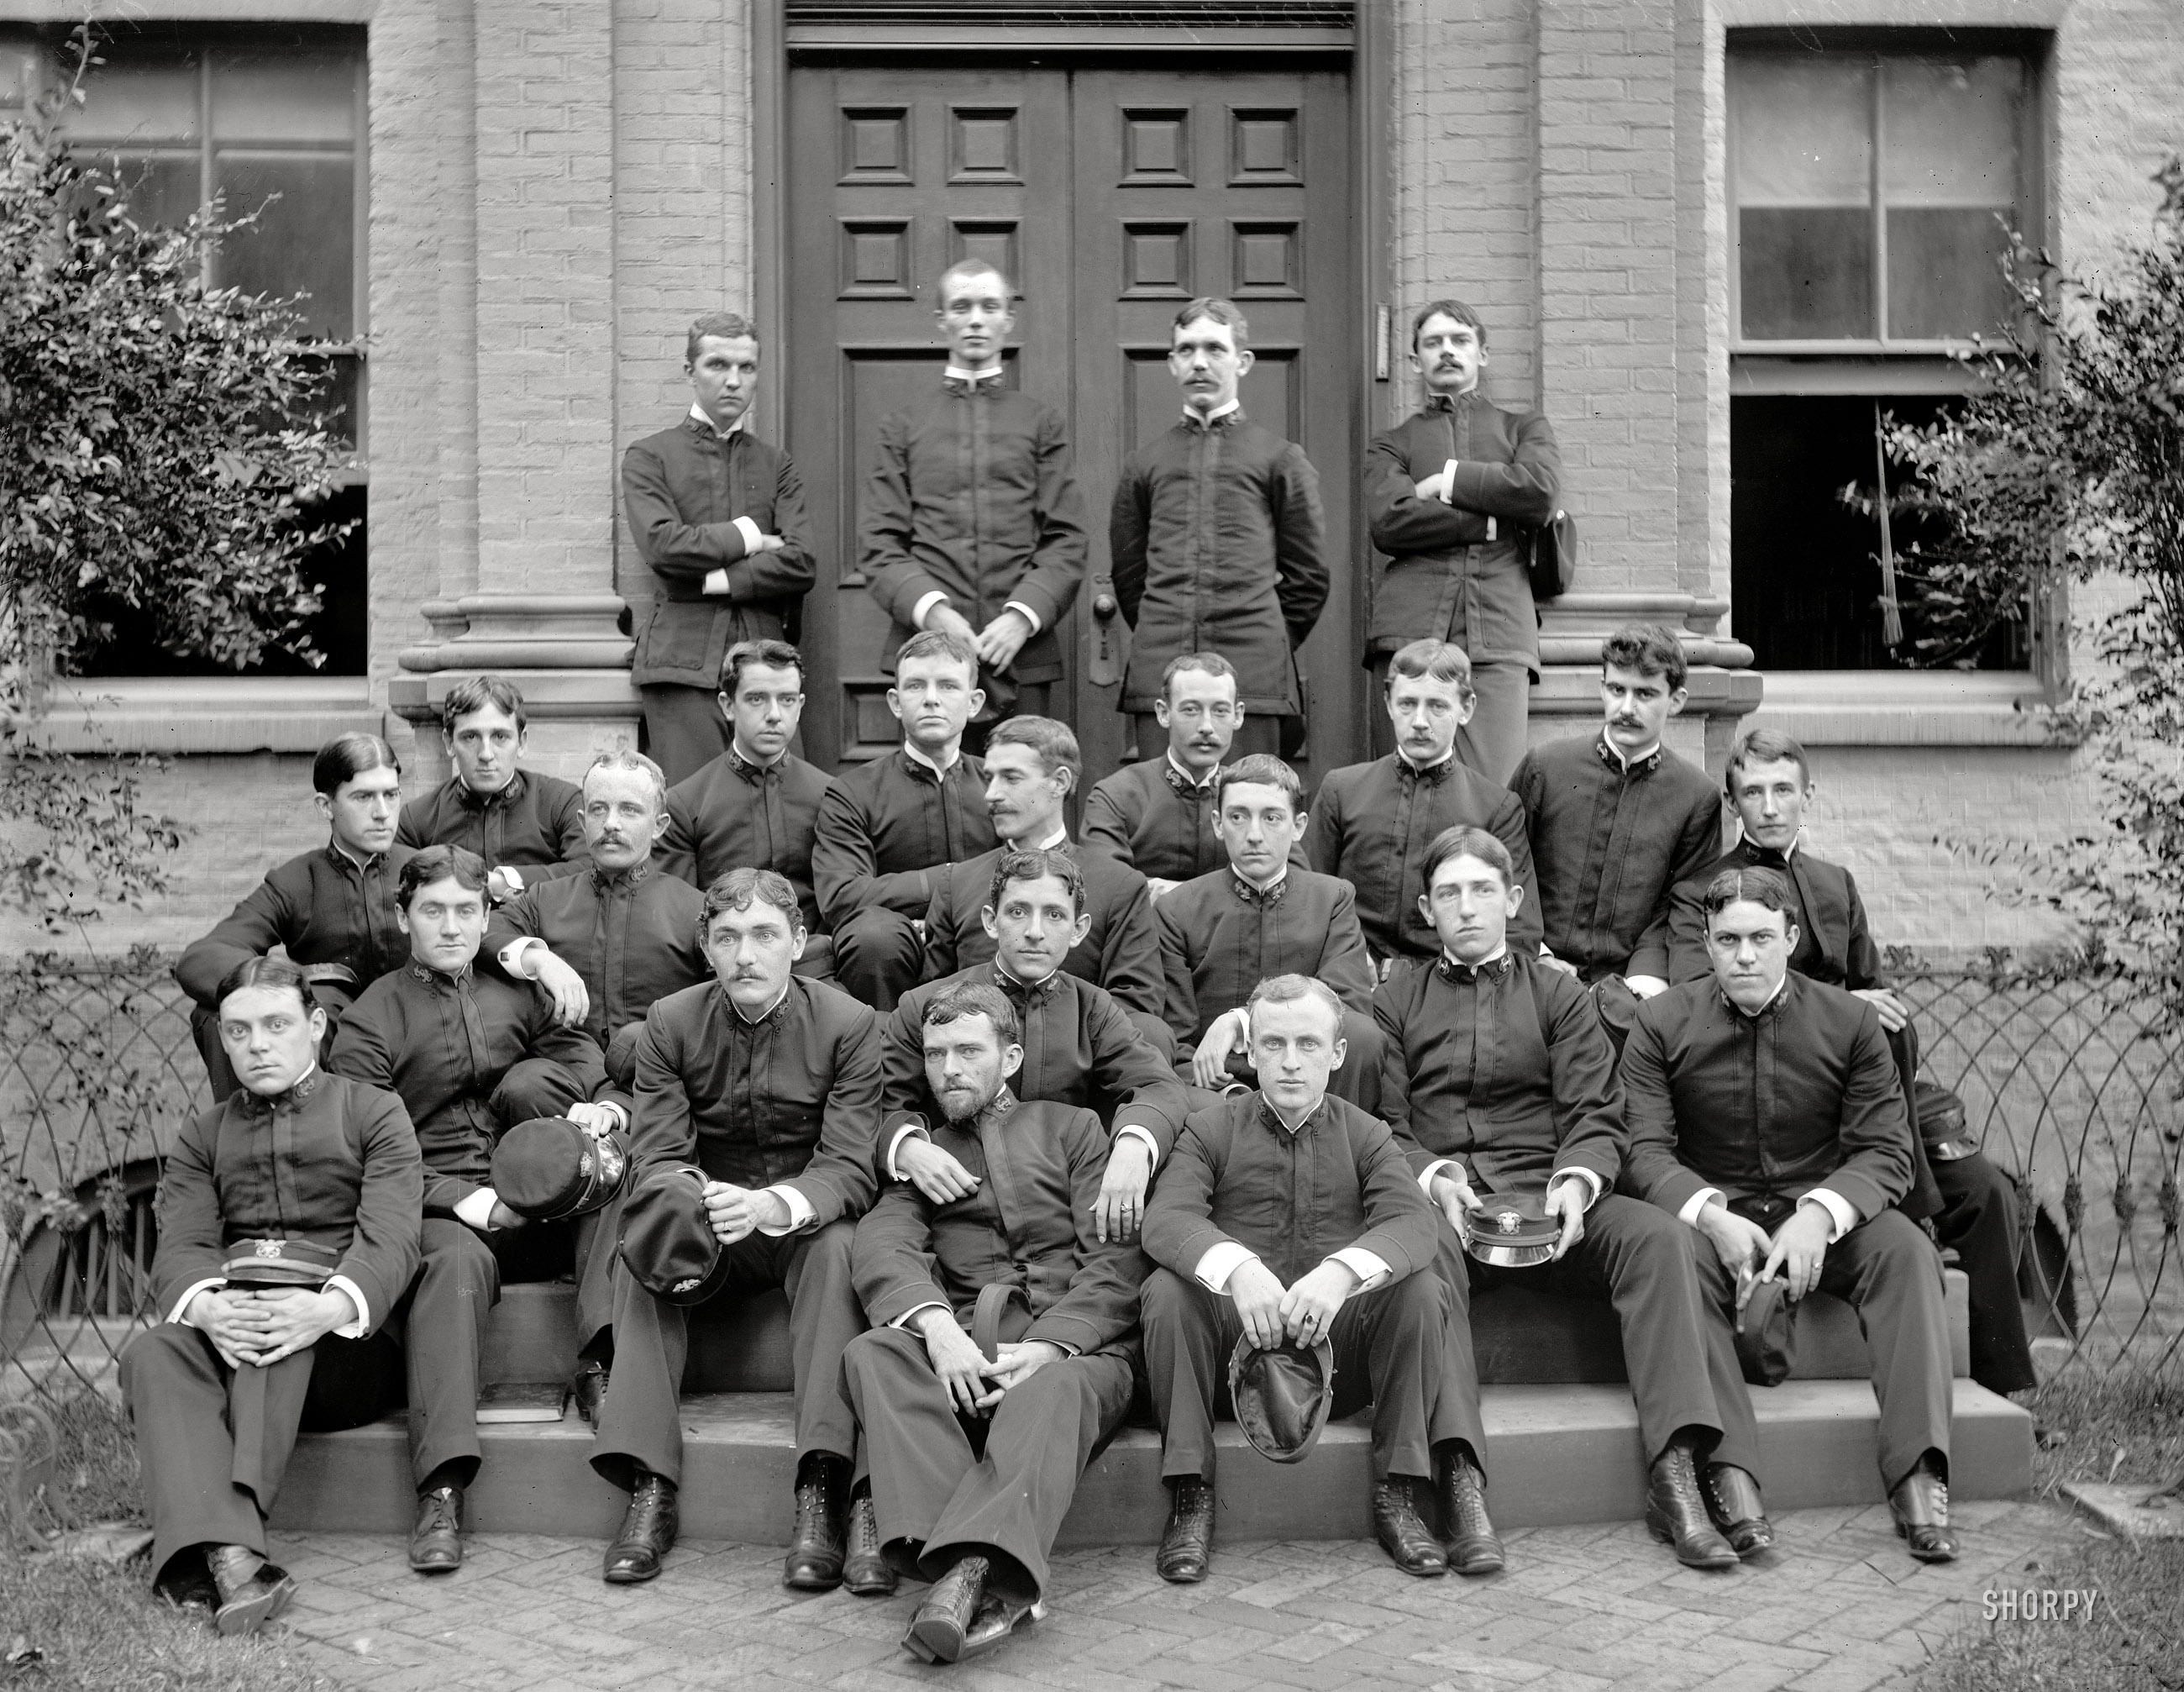 Annapolis, Maryland. "U.S. Naval Academy. A group of cadets. Graduating class of 1894." 8x10 inch glass negative, Detroit Publishing Company. View full size.